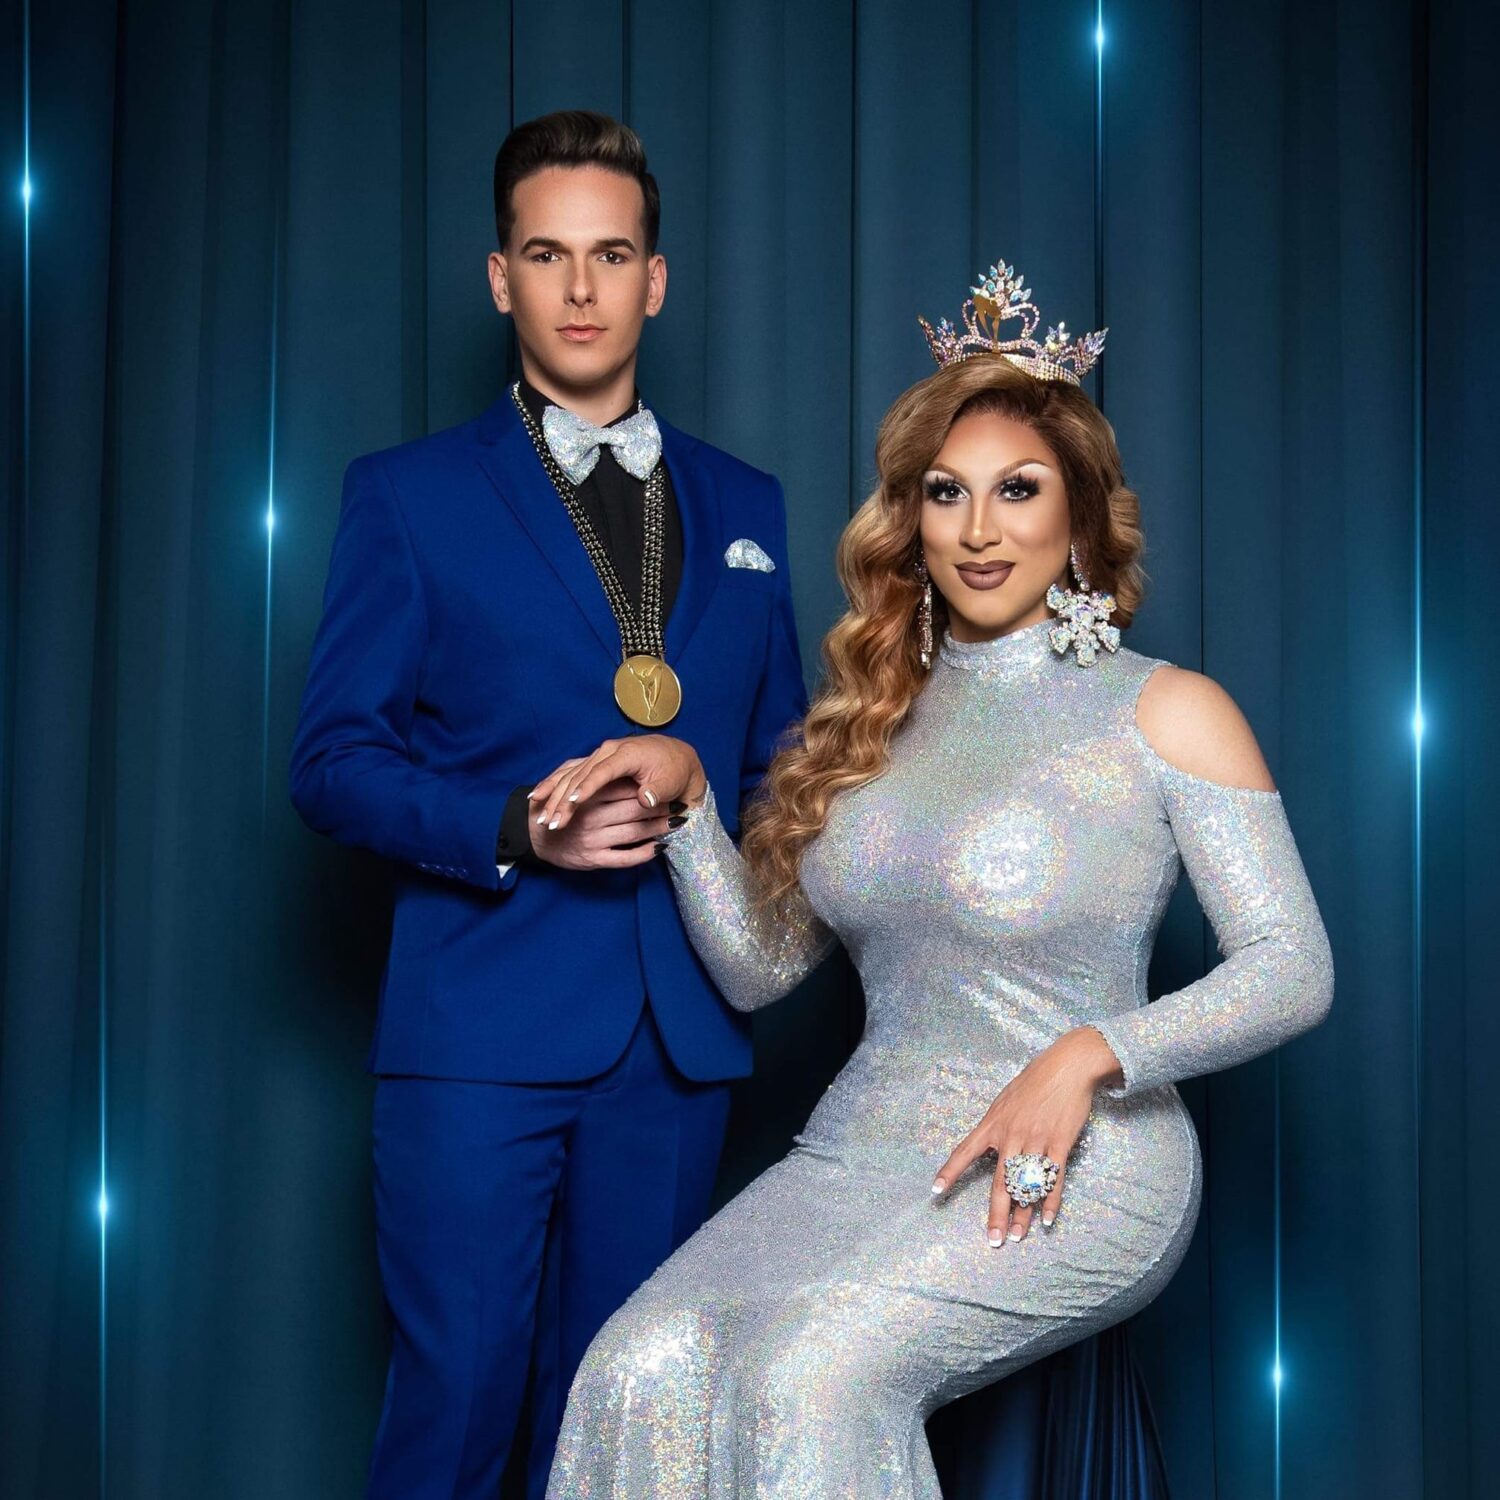 Vincent Van Rose and Lucie Vuitton | Promotional Photo for Mr. and Miss Gay Tulsa America 2020